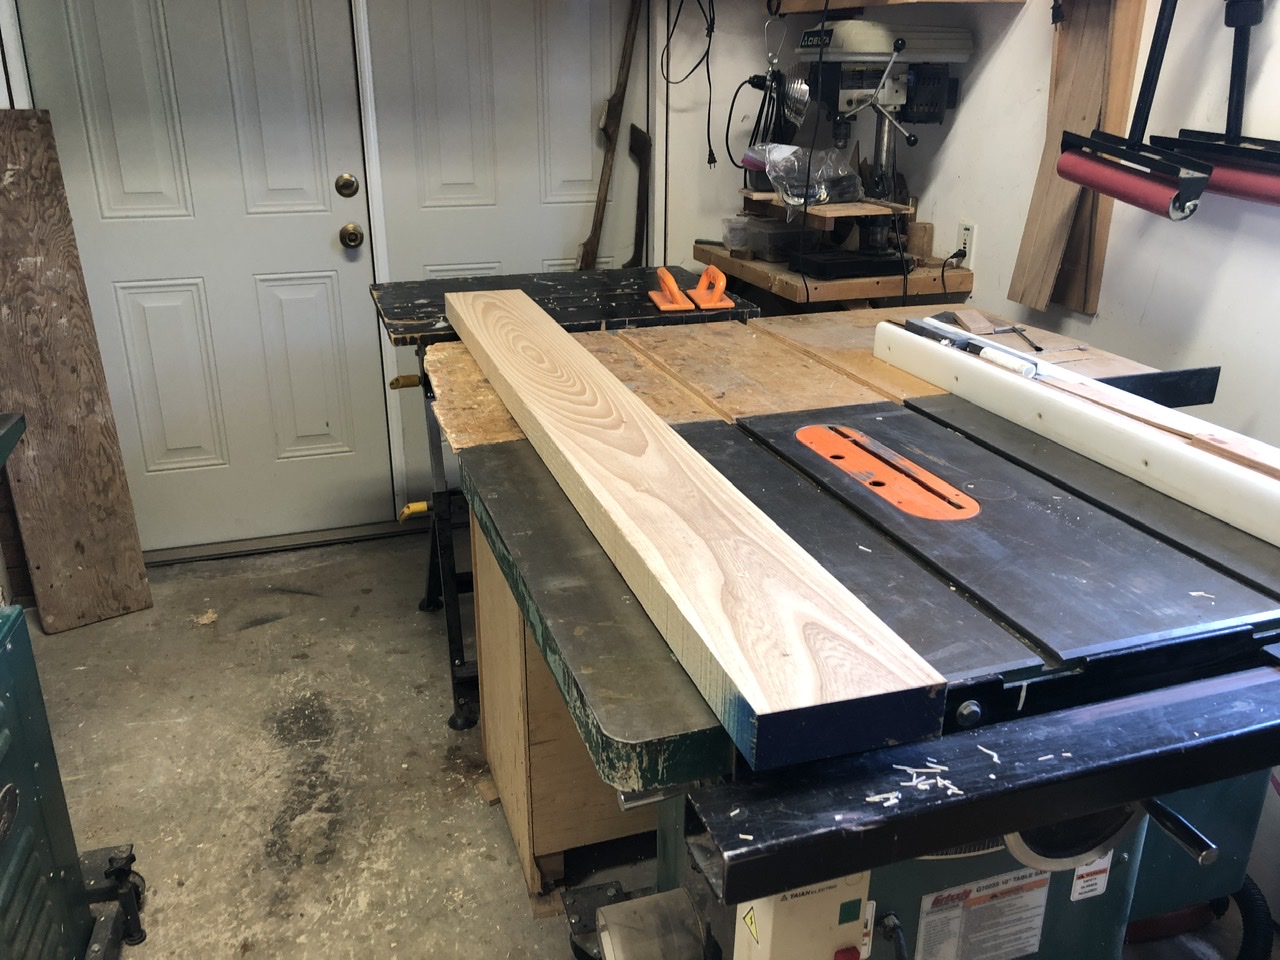 After planing the plank can be ripped with wise. The reference guide is the edge you finished in the jointer. It's rides against the fence in the table saw.